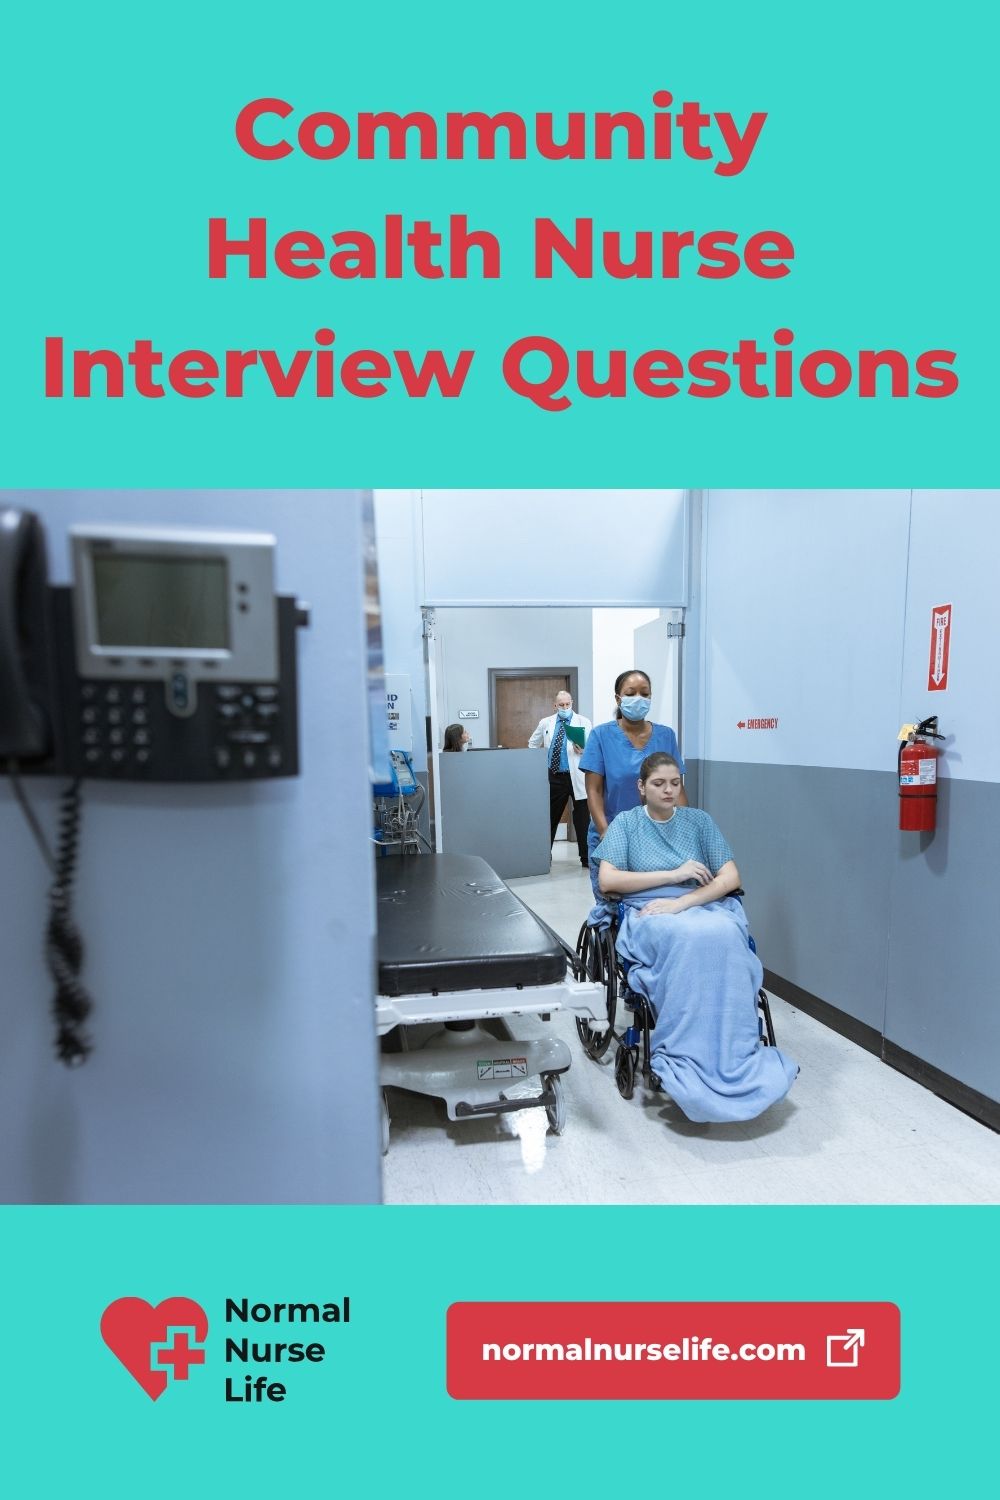 Community health nurse interview questions and answers